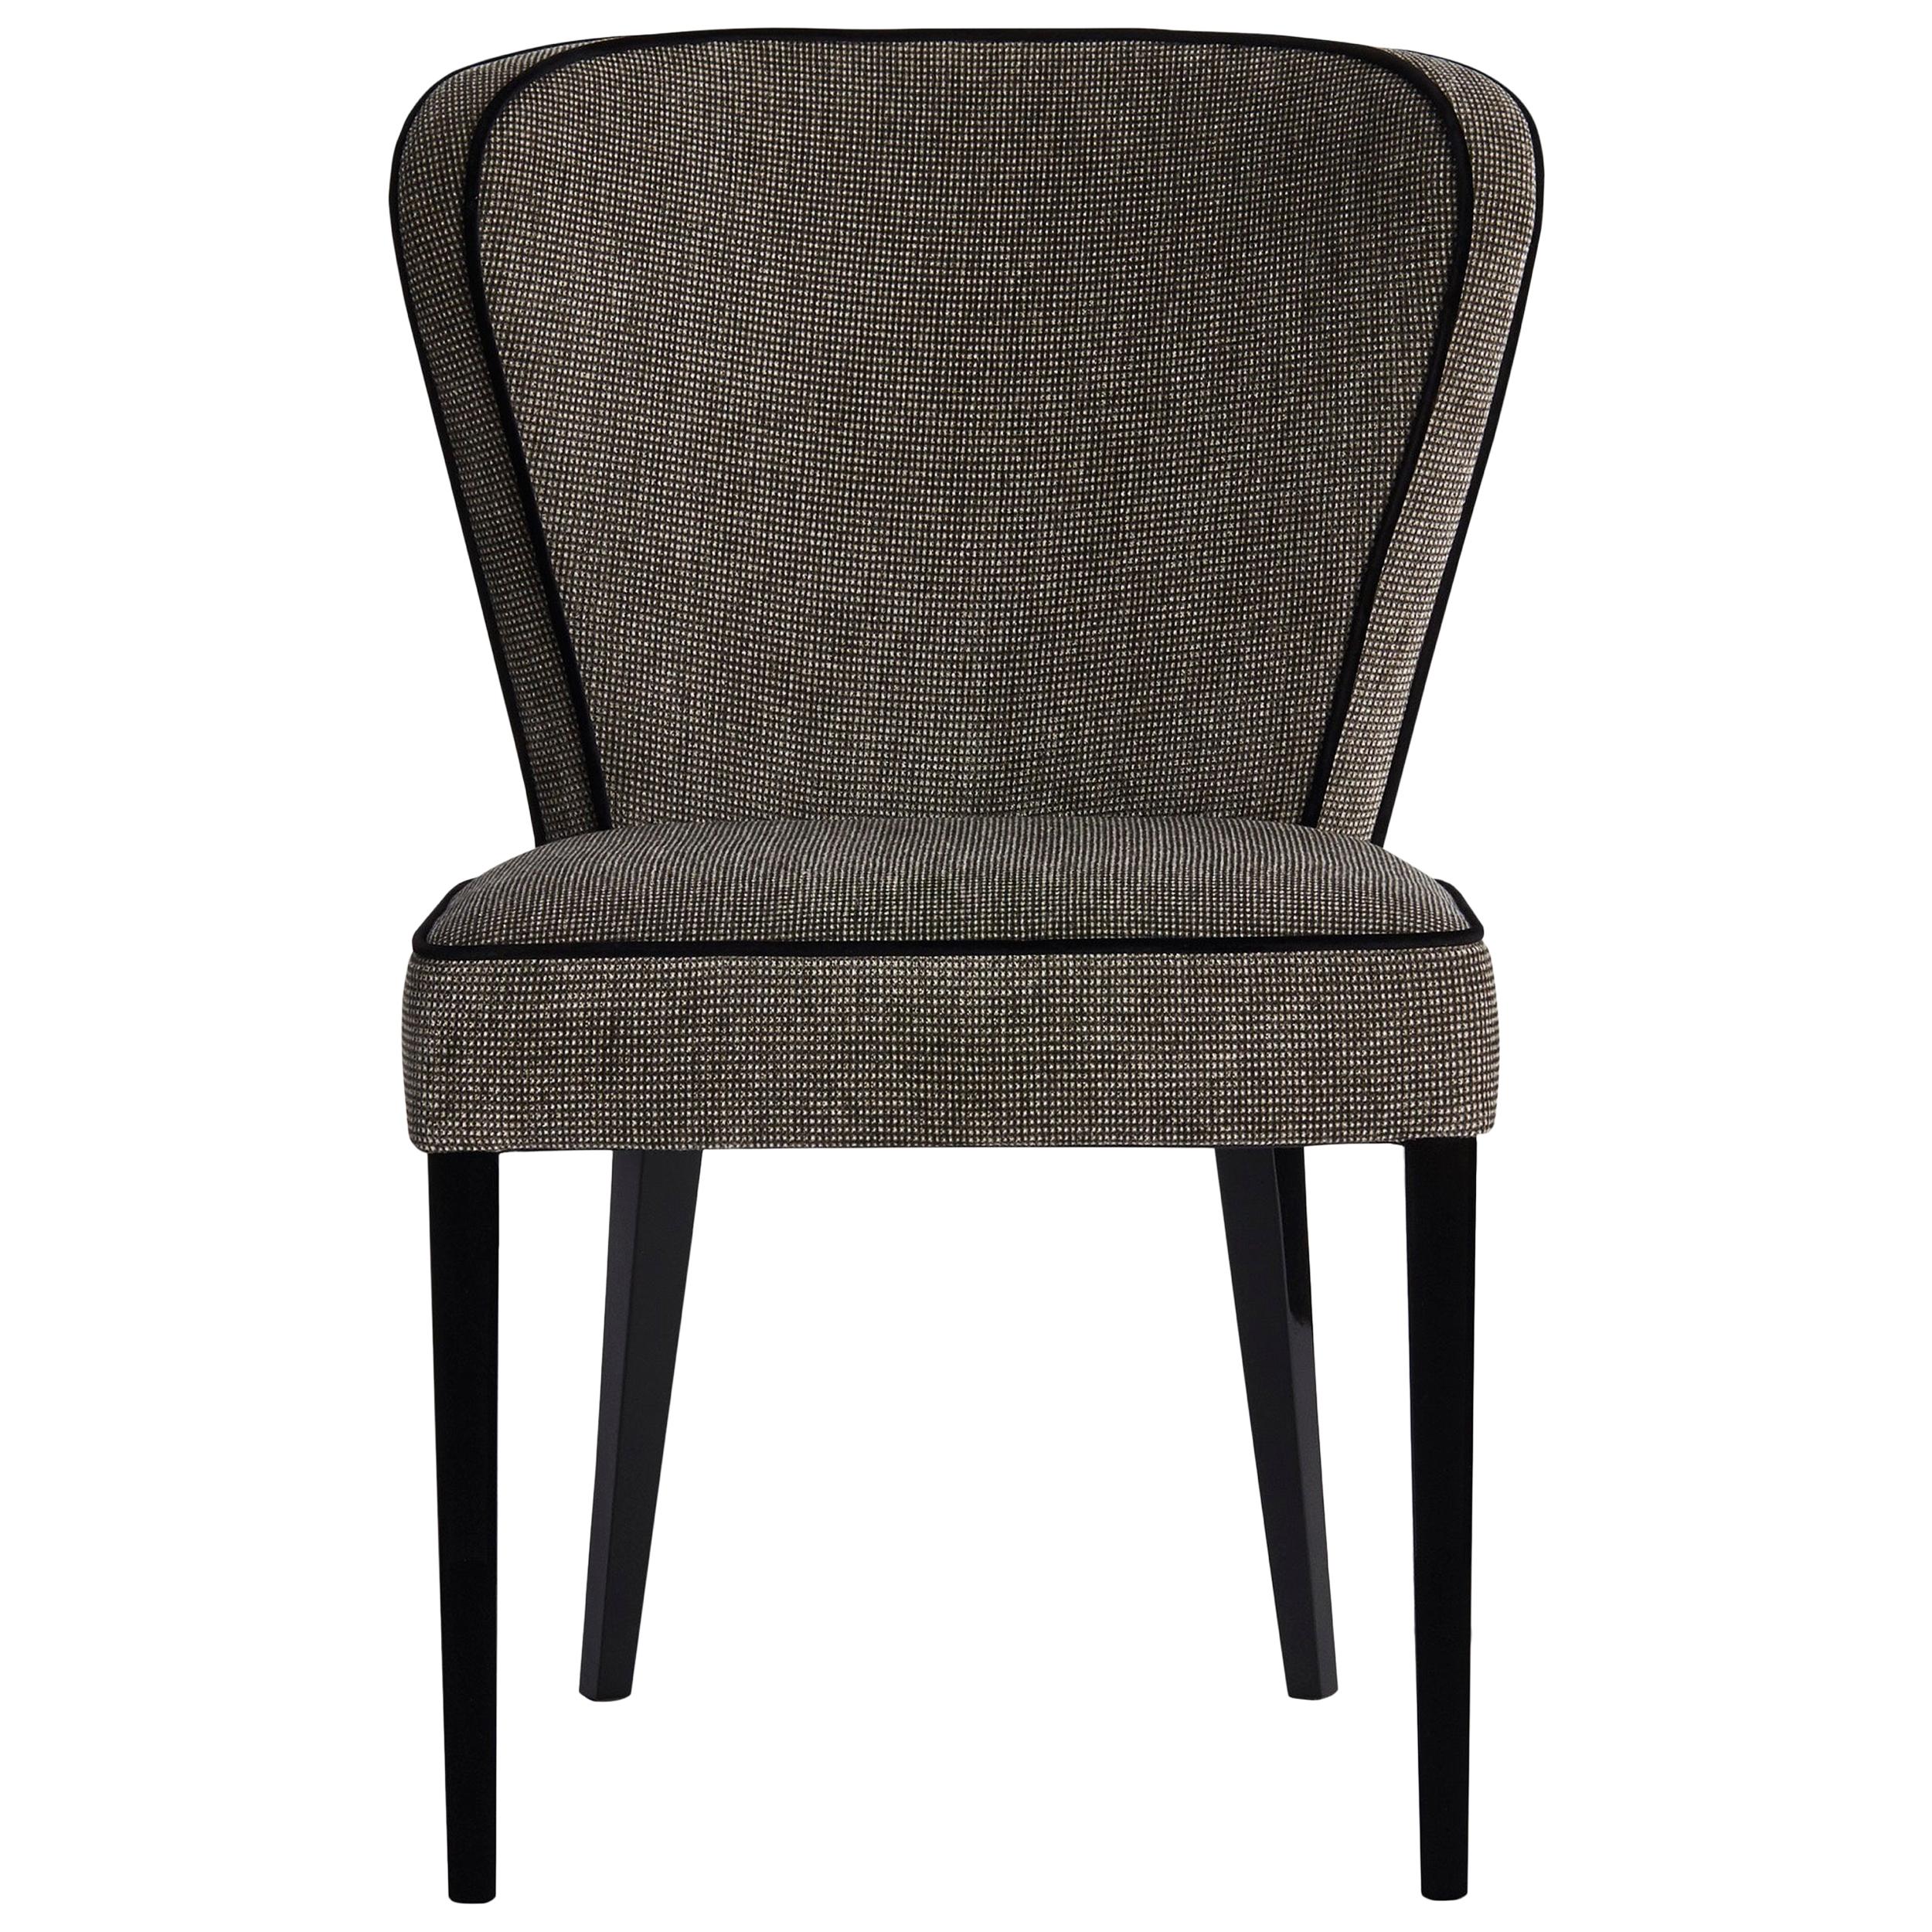 RIBEIRA dining chair with contrasting Piping Details